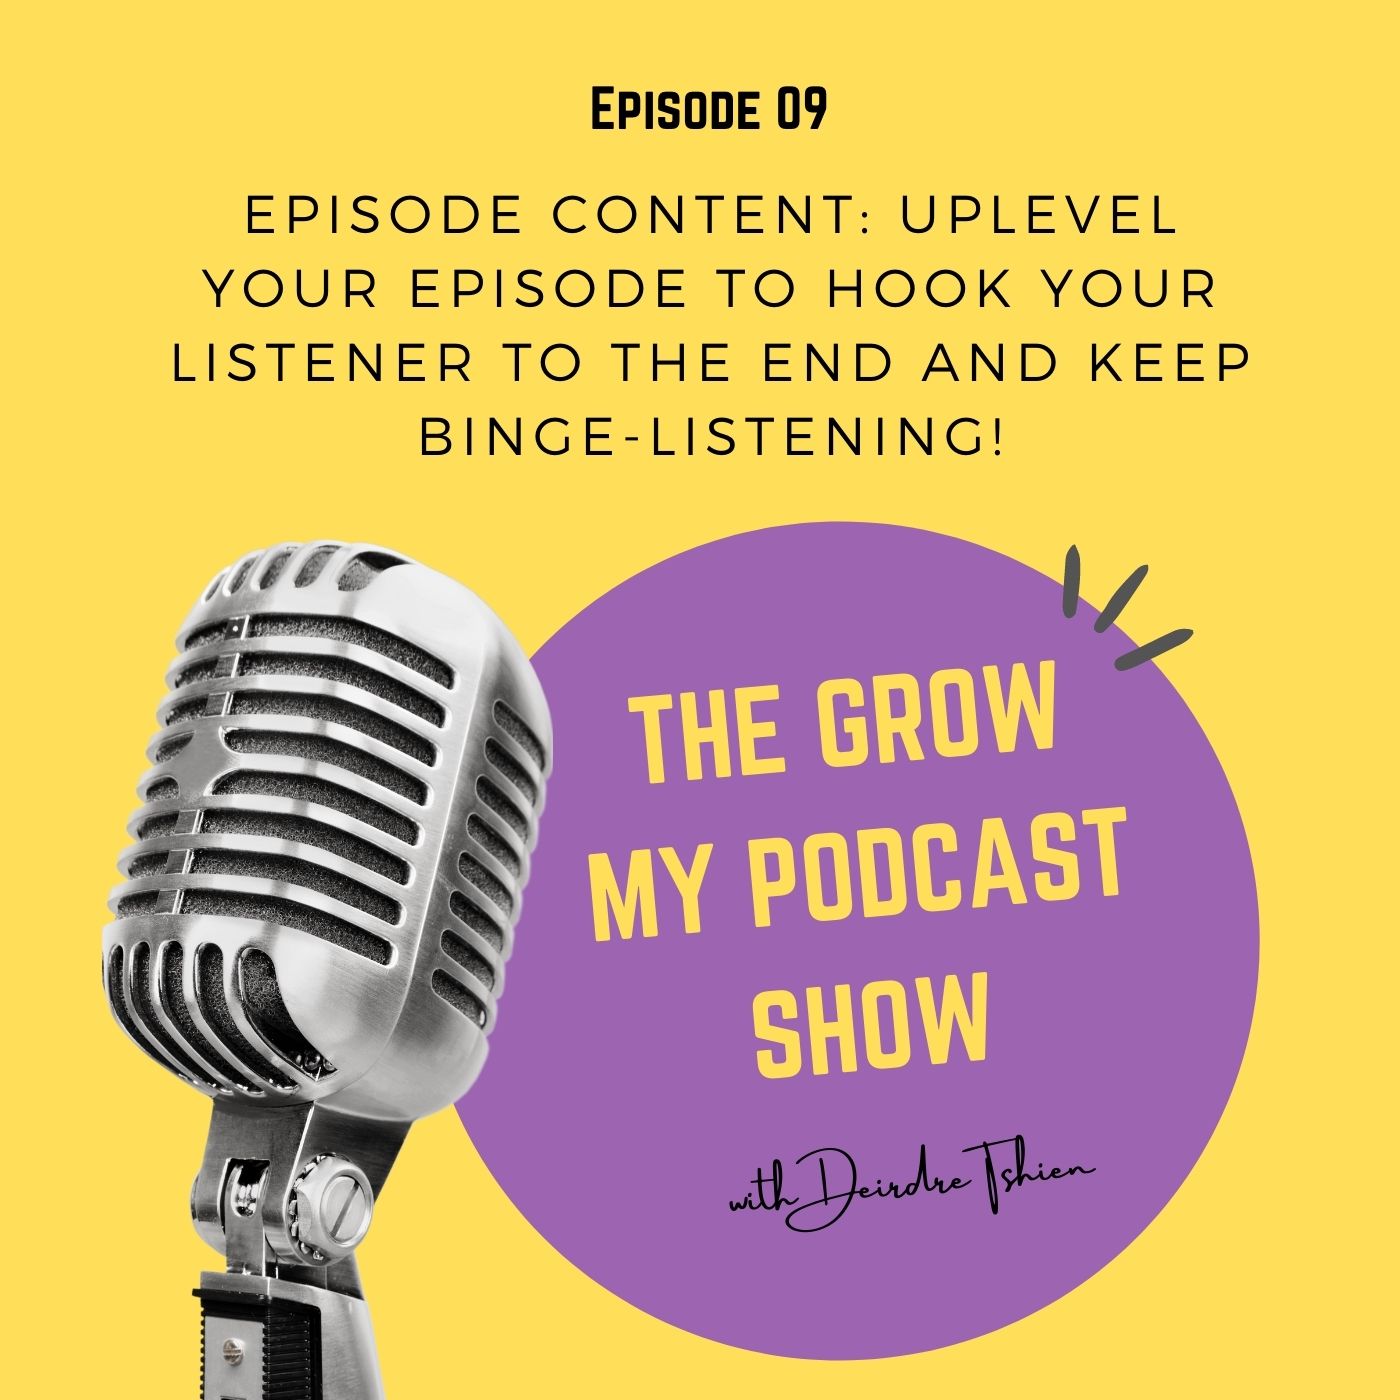 Episode Content: Uplevel Your Episode to Hook your Listener to the End and Keep Binge-Listening!